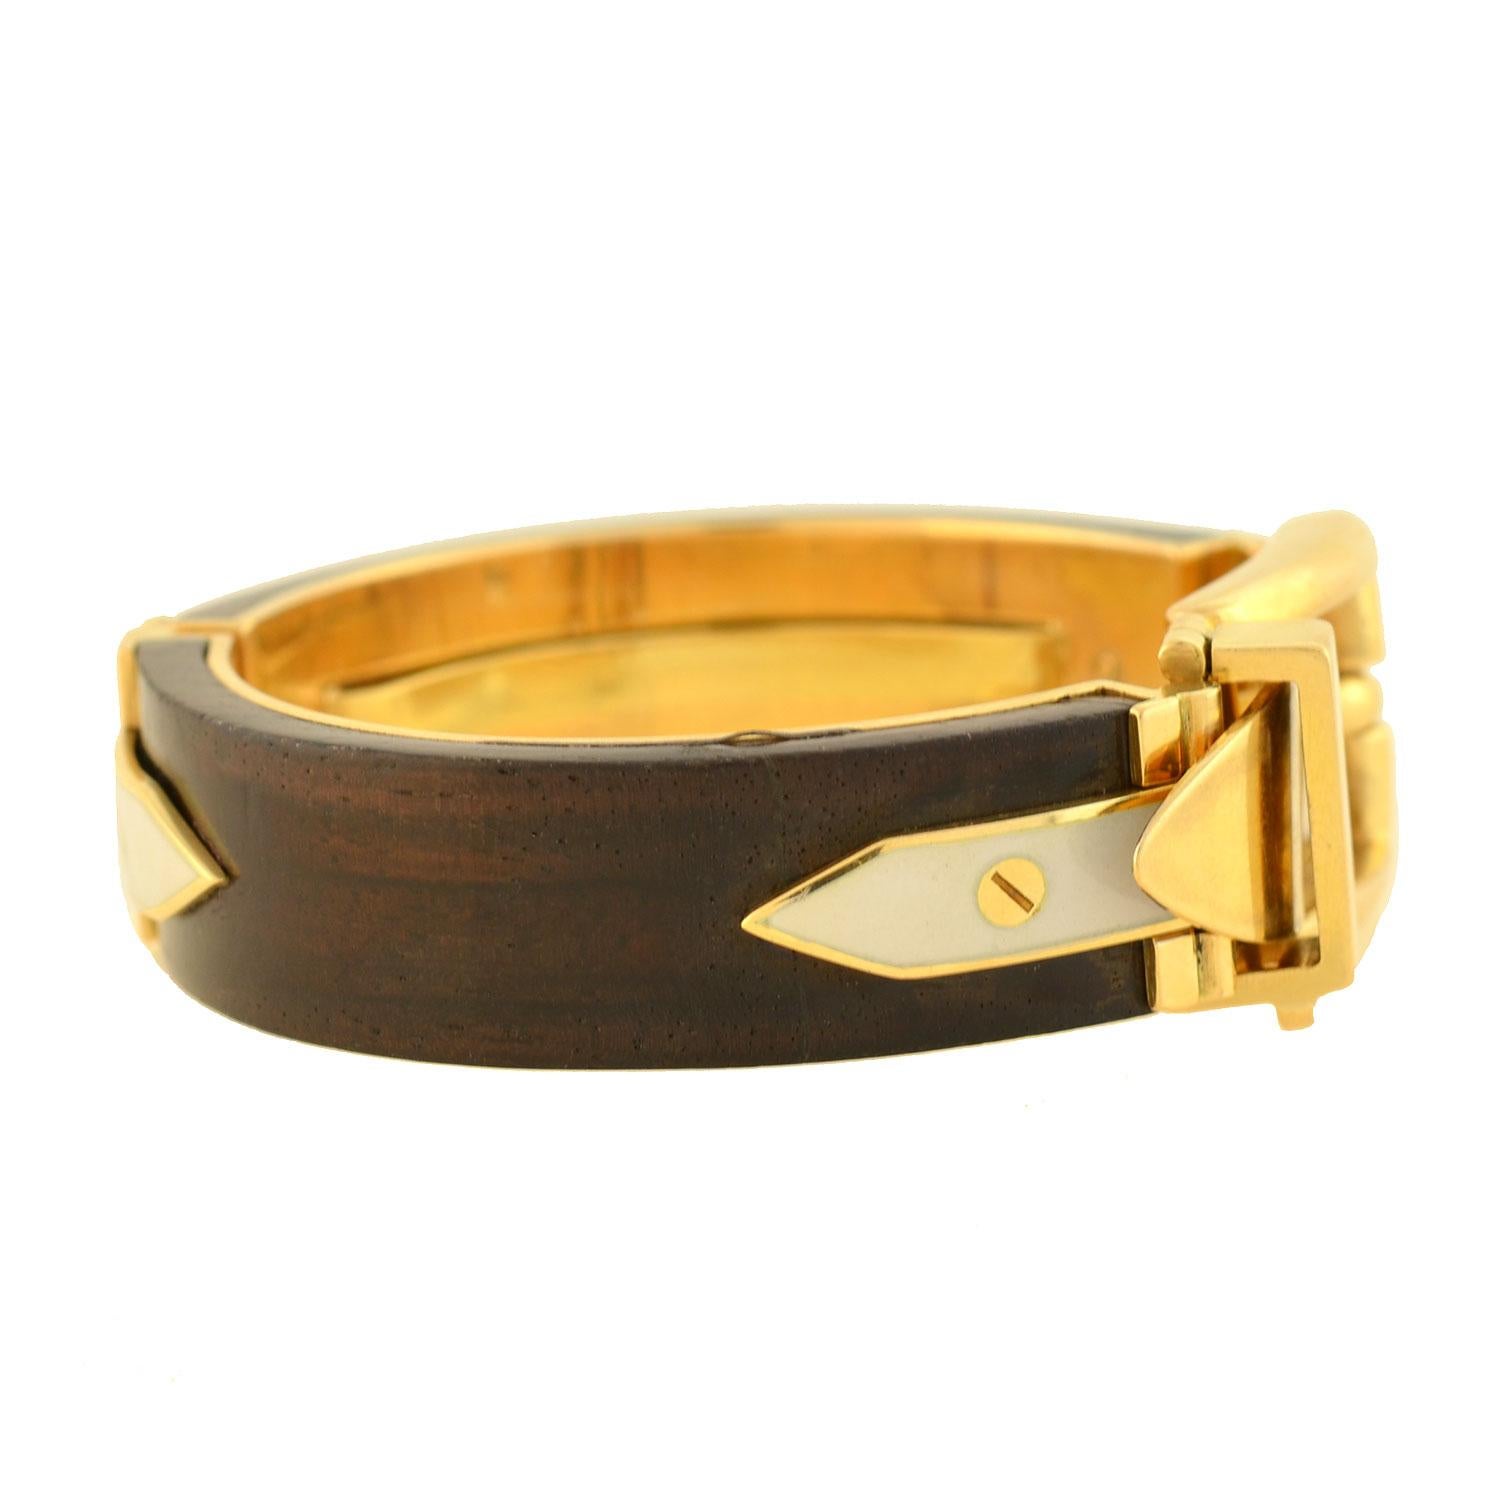 A gorgeous and rare signed Vintage Gucci bangle bracelet from the 1970s era! This 18kt yellow gold piece features a stunning functional buckle design at the front, allowing it to easily open and close and adjust in size. Two curved pieces of